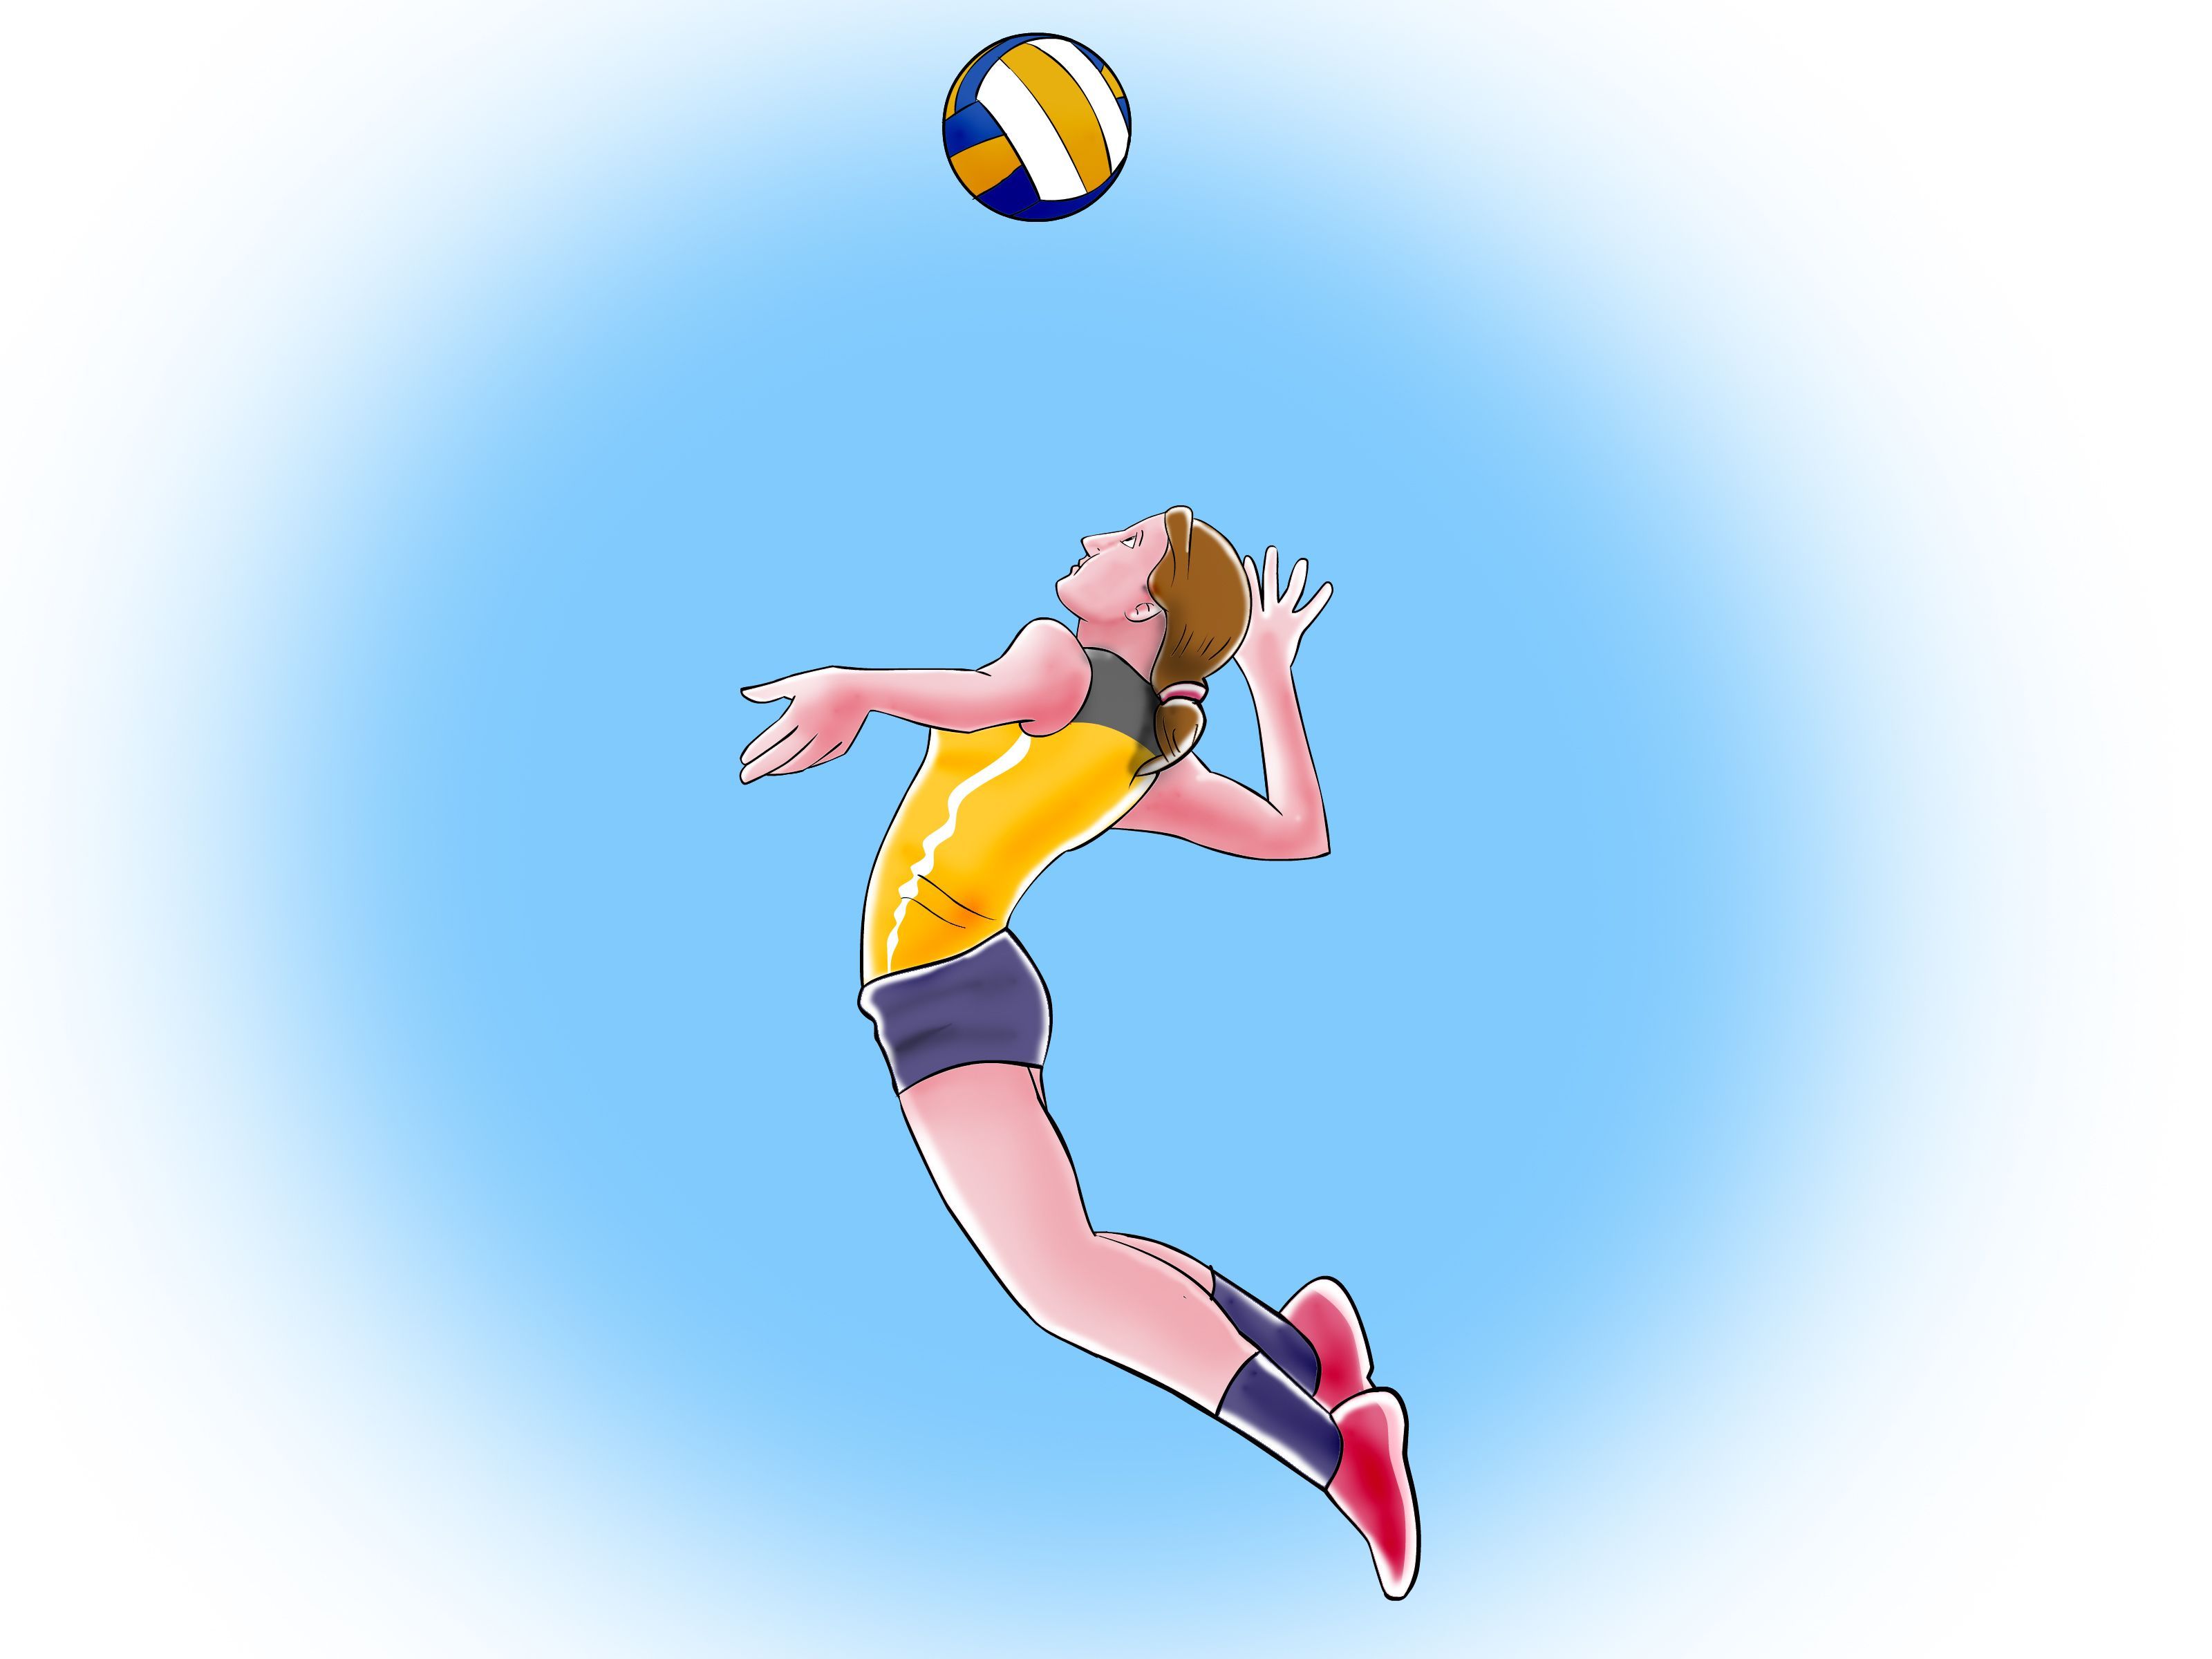 Free download Volleyball Photo HD 4k 3200x2400 Download HD Wallpaper [3200x2400] for your Desktop, Mobile & Tablet. Explore Volleyball 4K Wallpaper. Volleyball Background, Volleyball Wallpaper, Volleyball Wallpaper Design